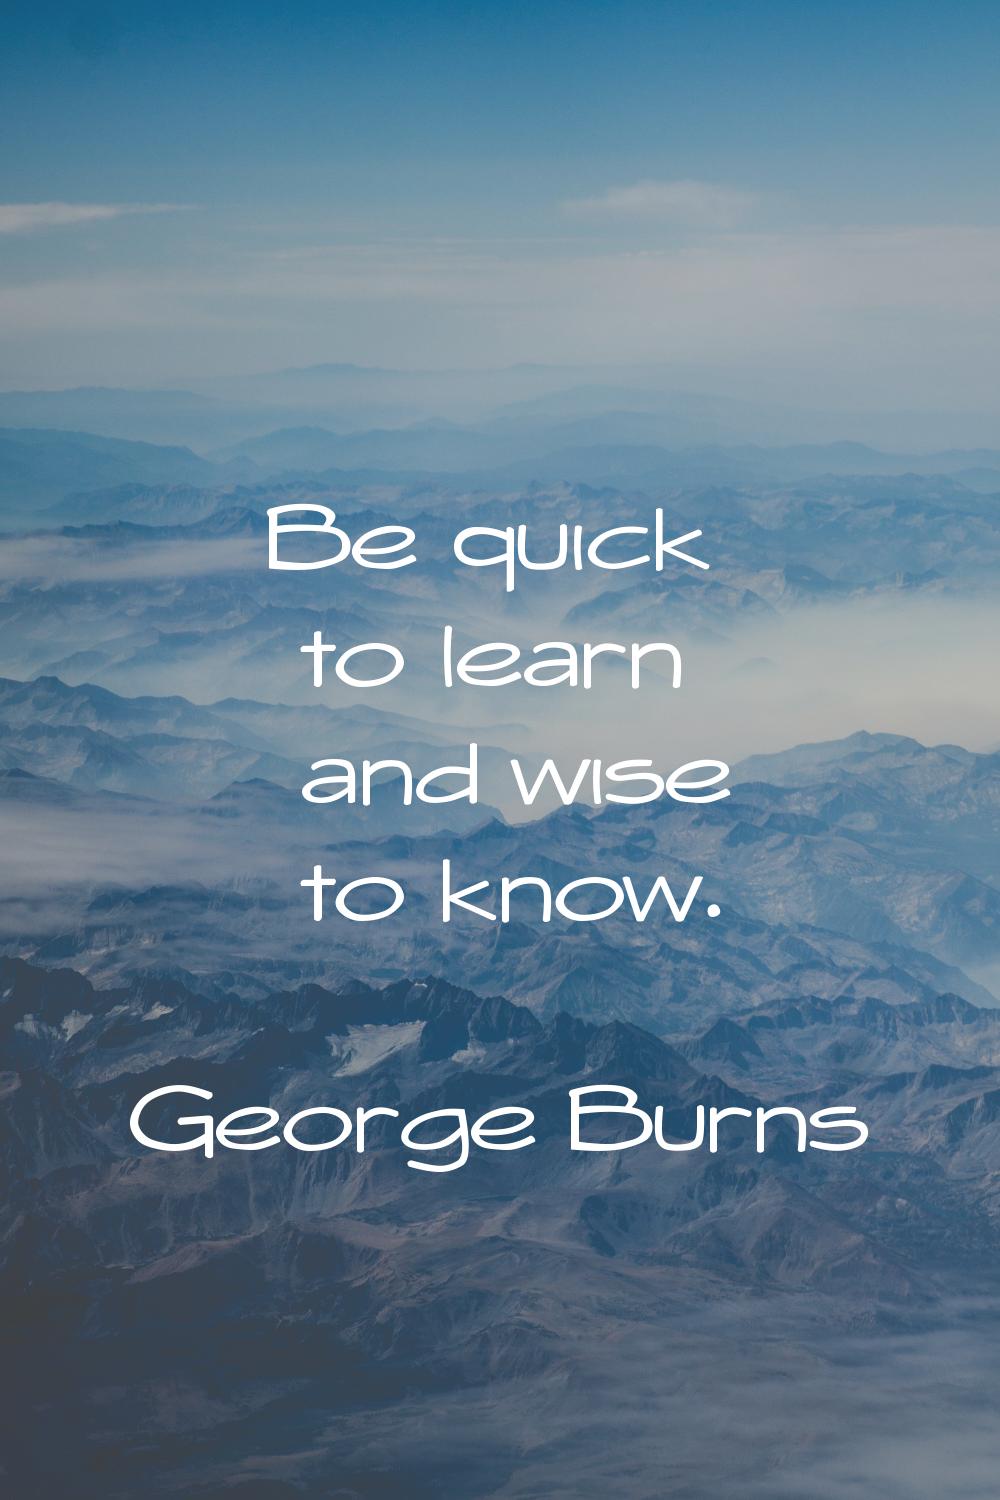 Be quick to learn and wise to know.